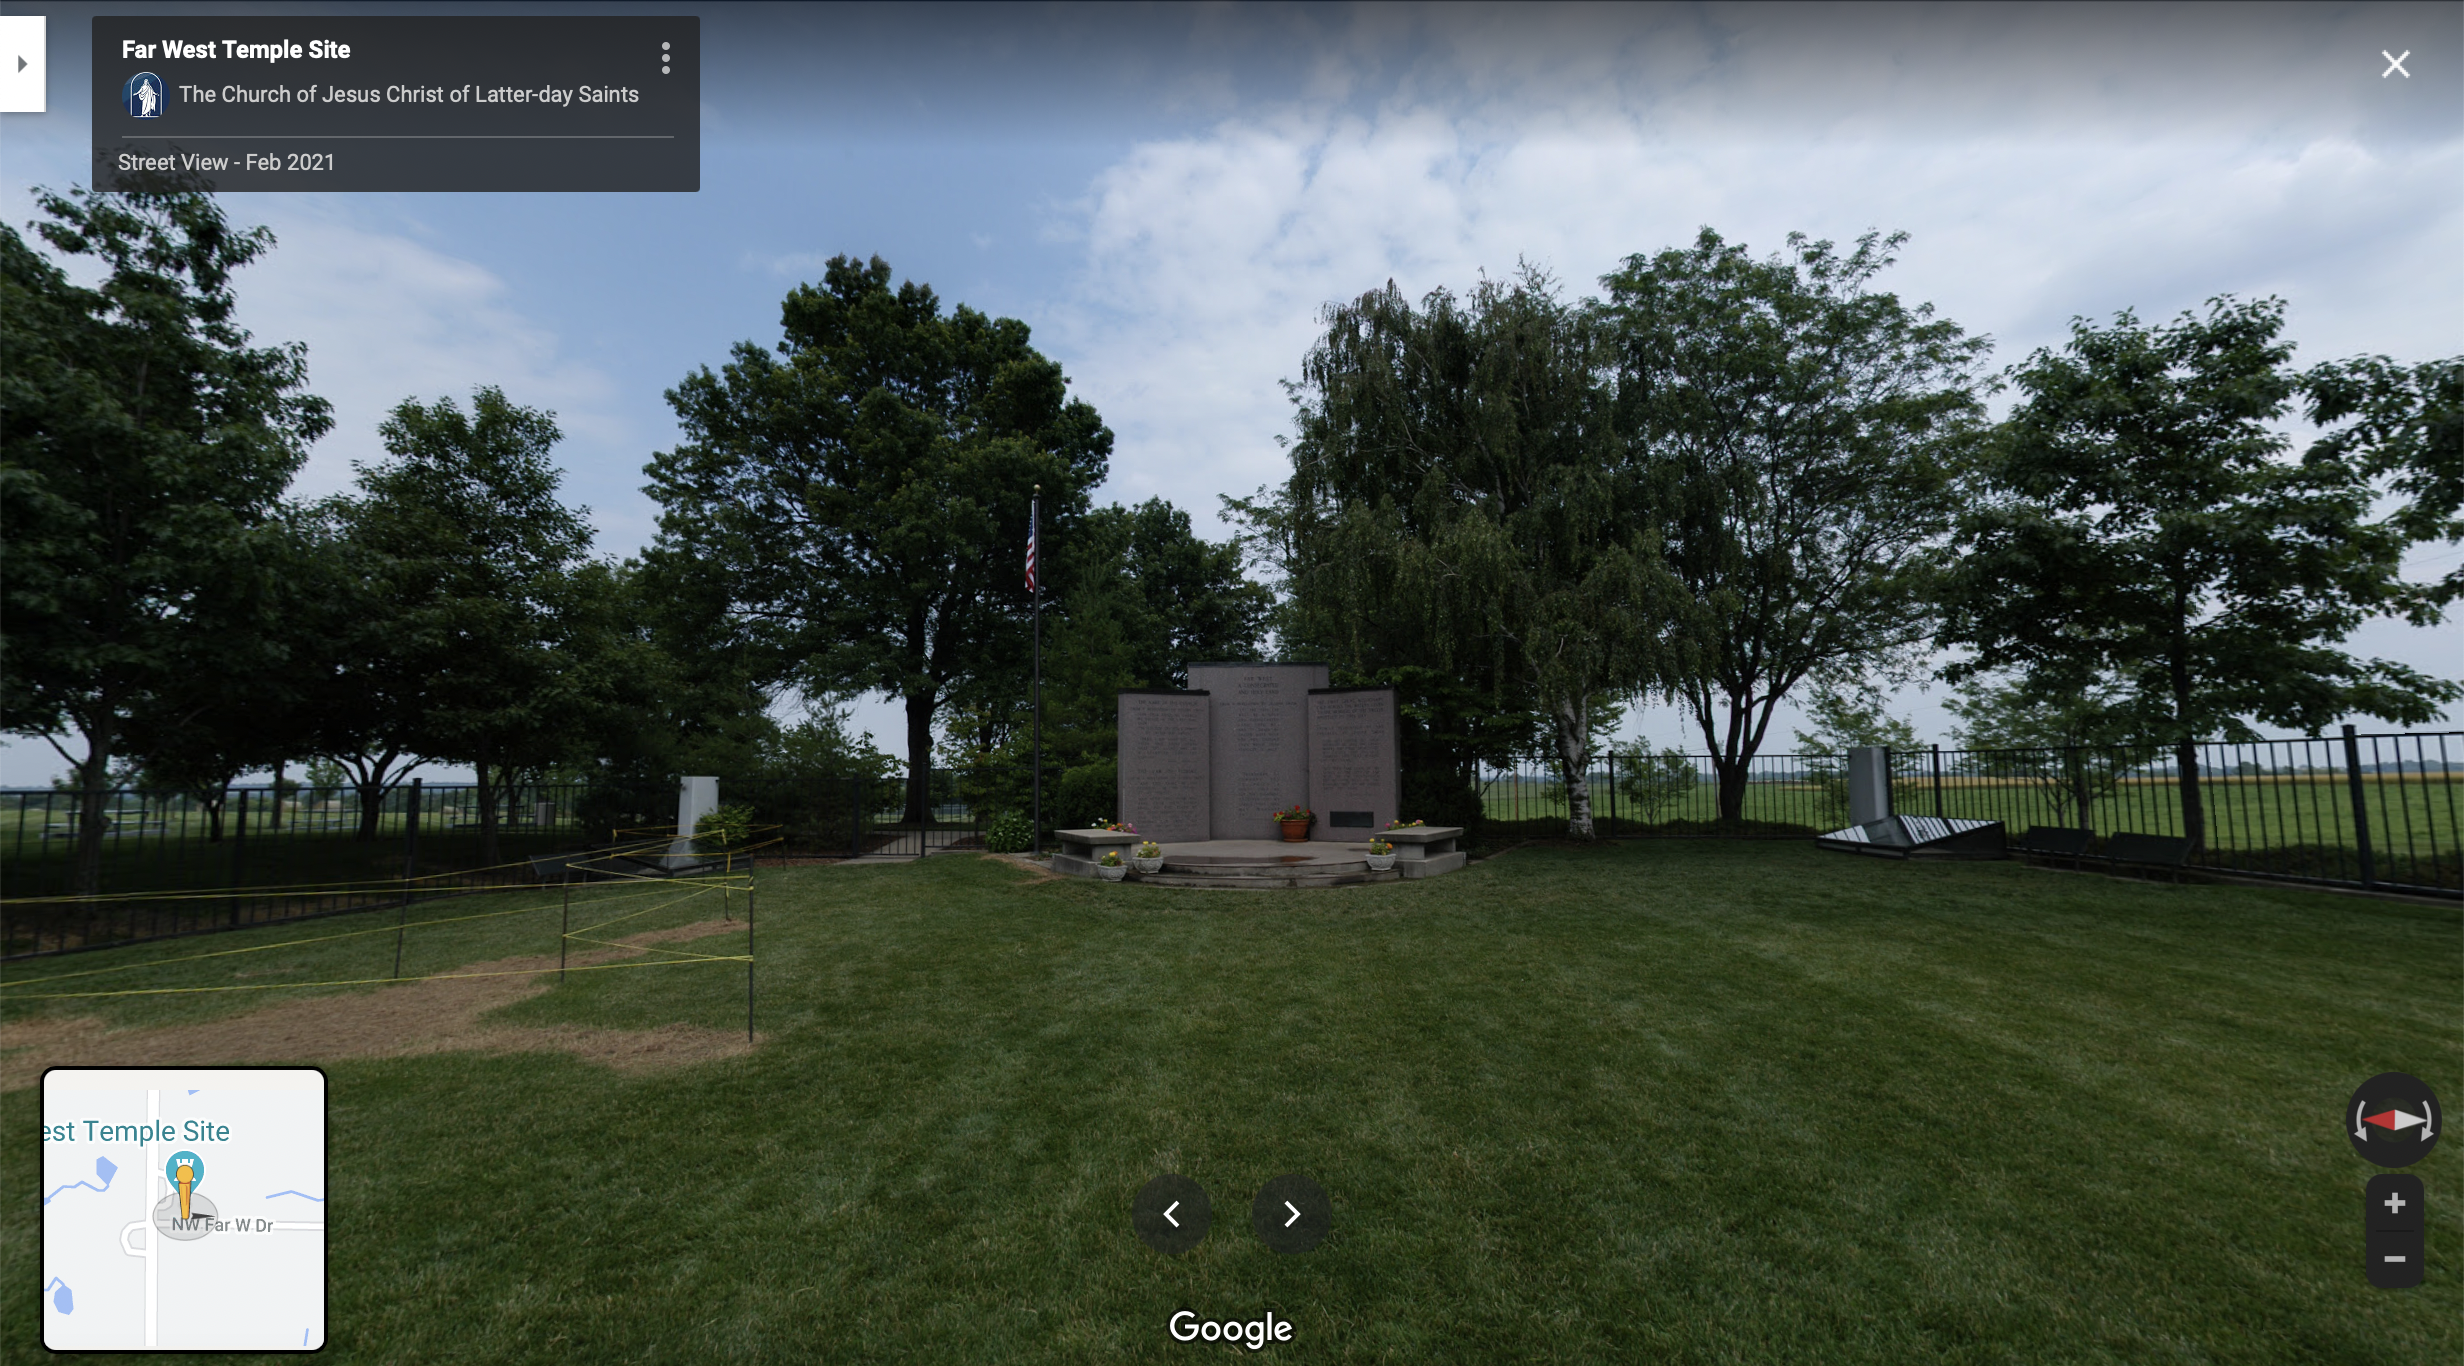 Screenshot of the Google Maps 360 view of the Far West Temple Site